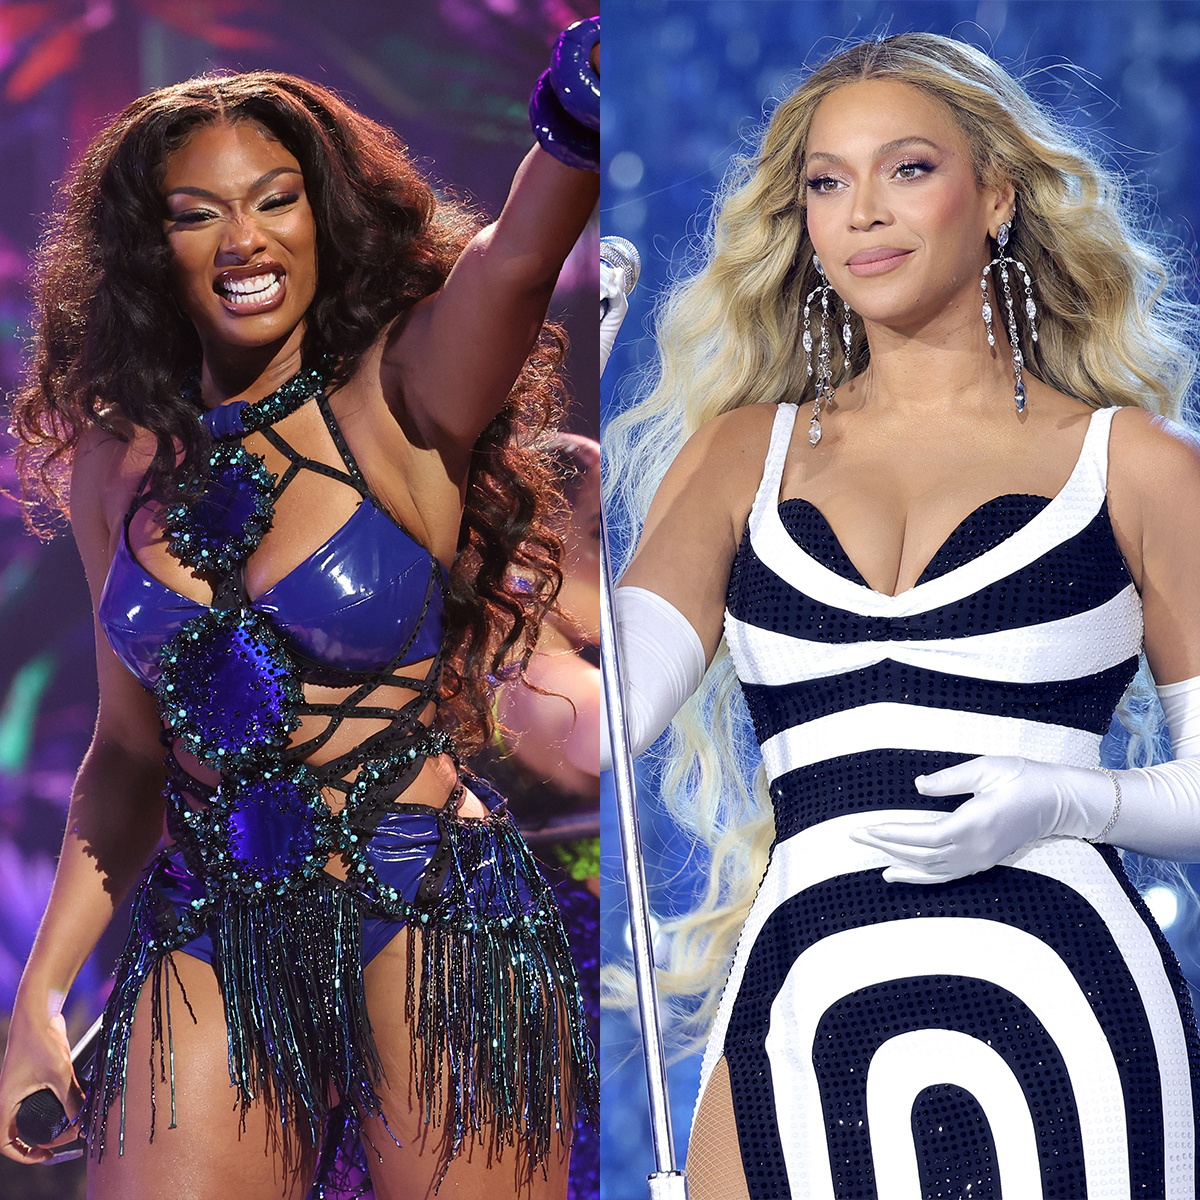 Megan Thee Stallion Joins Beyoncé for Surprise Performance in Houston